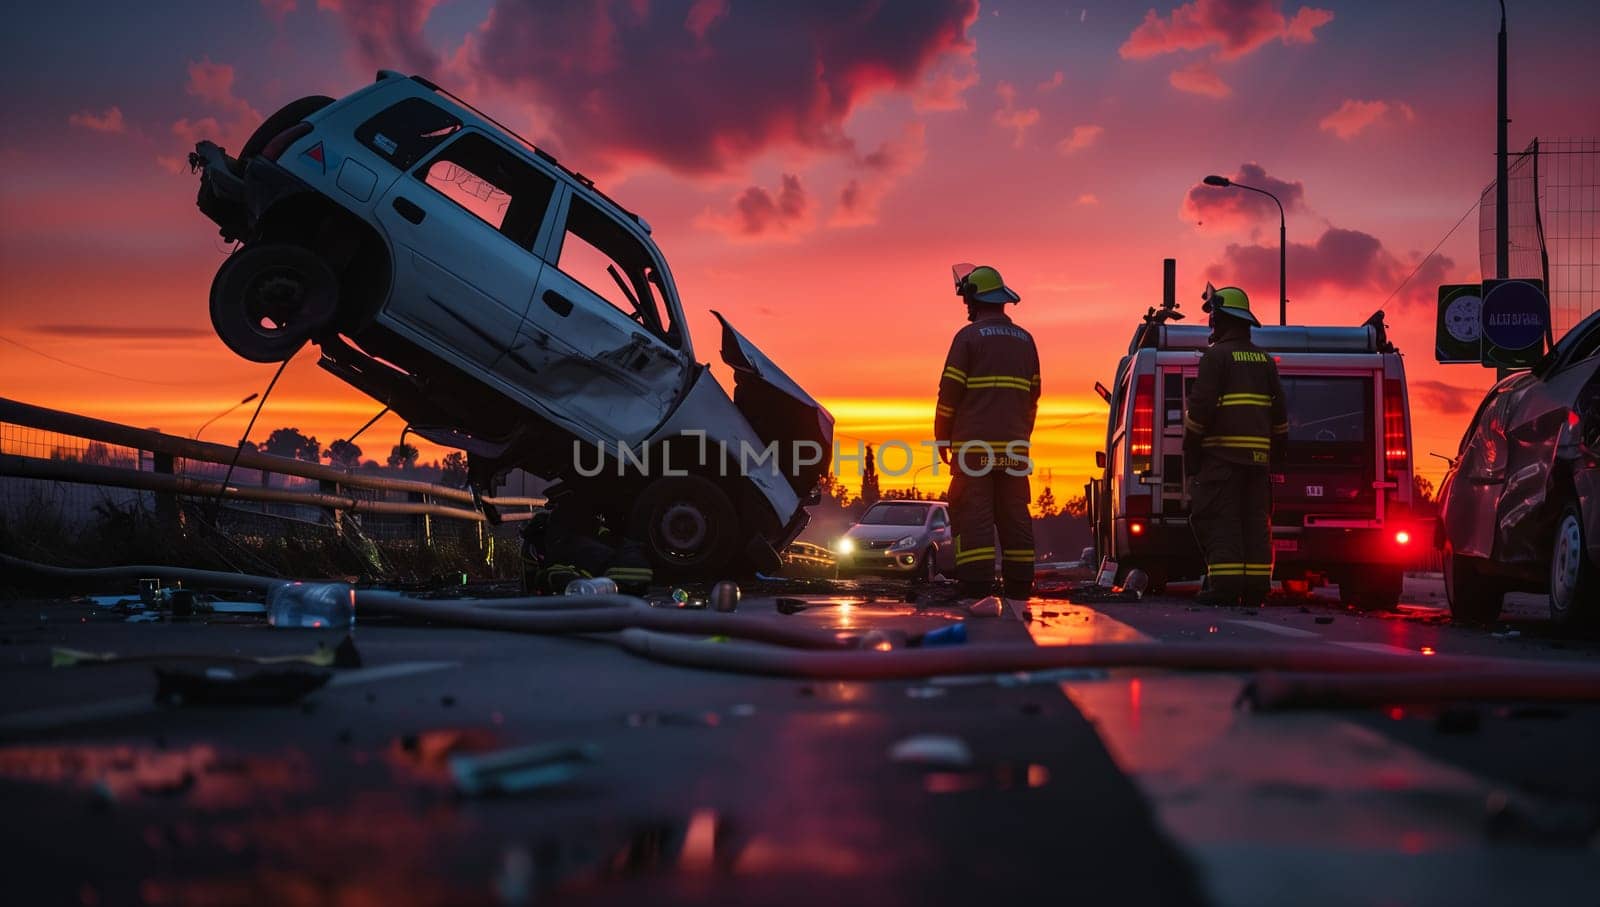 A car is parked on the side of the road under the cloudy sky next to a fire truck. Its tire is flat, with automotive lighting shining through the window, on the asphalt